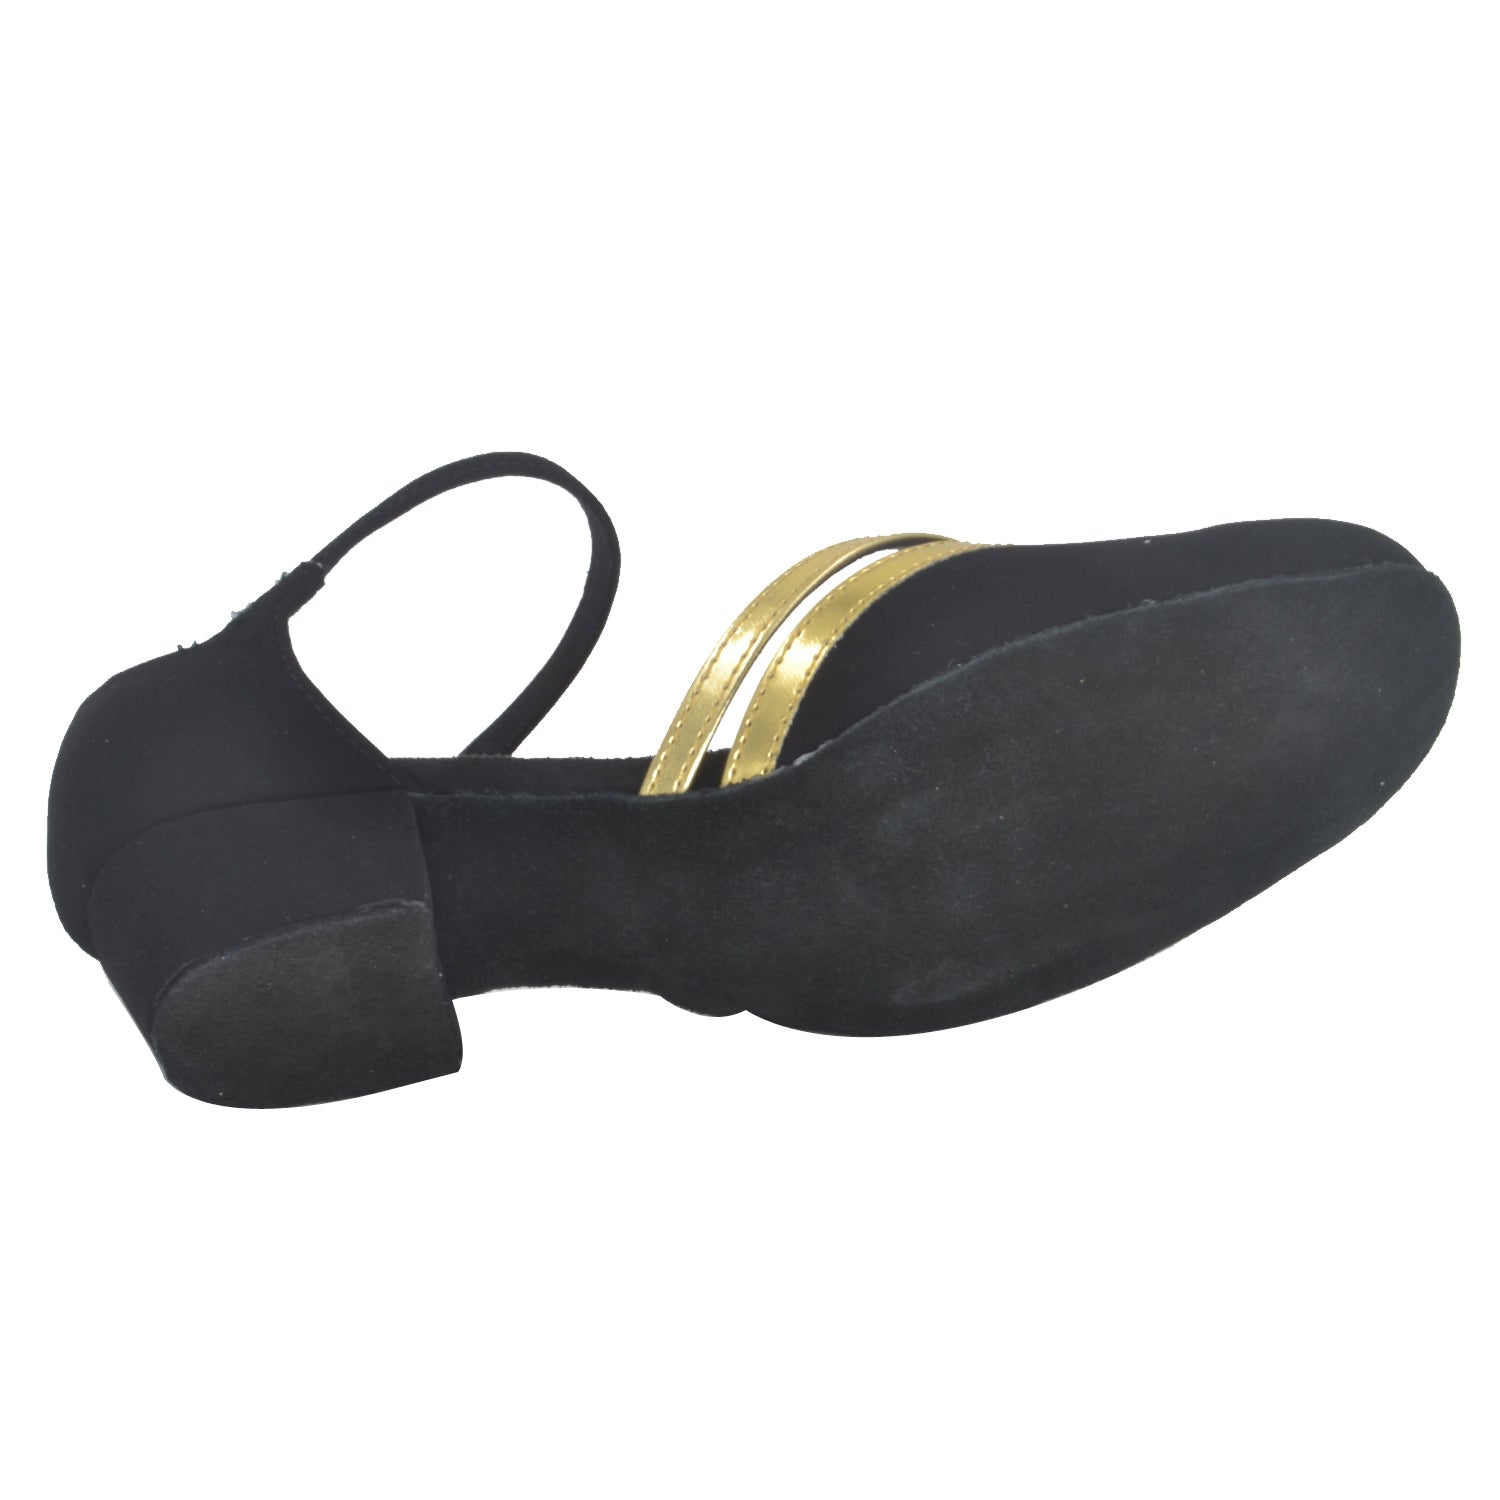 Elegant black and gold women's ballroom dancing shoes with suede sole for tango and Latin dance0